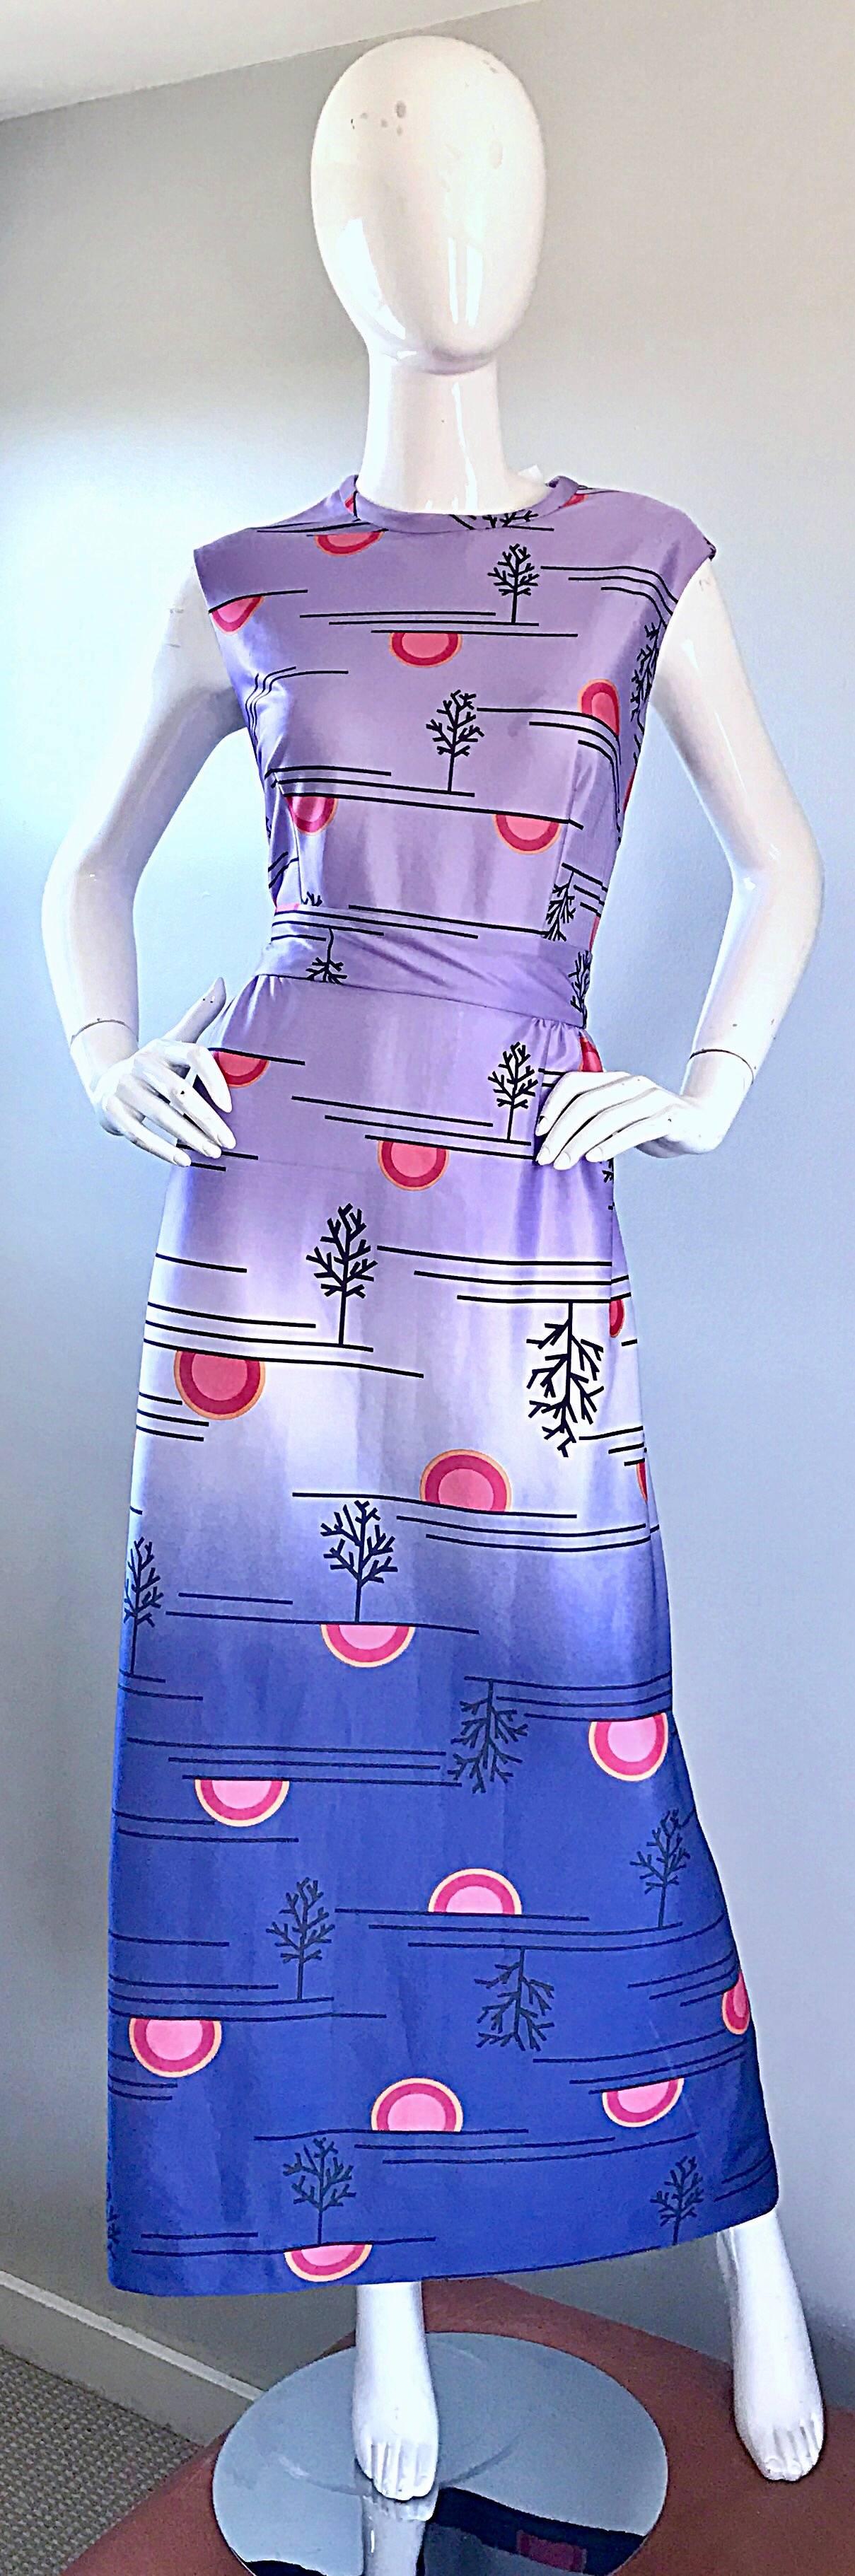 1970s YVES JENNET novelty print maxi dress! Vibrant purple bodice with an ombre effect that leads to a vibrant blue skirt. Japanese themed print, with trees and sunsets / sunrises throughout. Hidden zipper up the back. Can easily be dressed up or